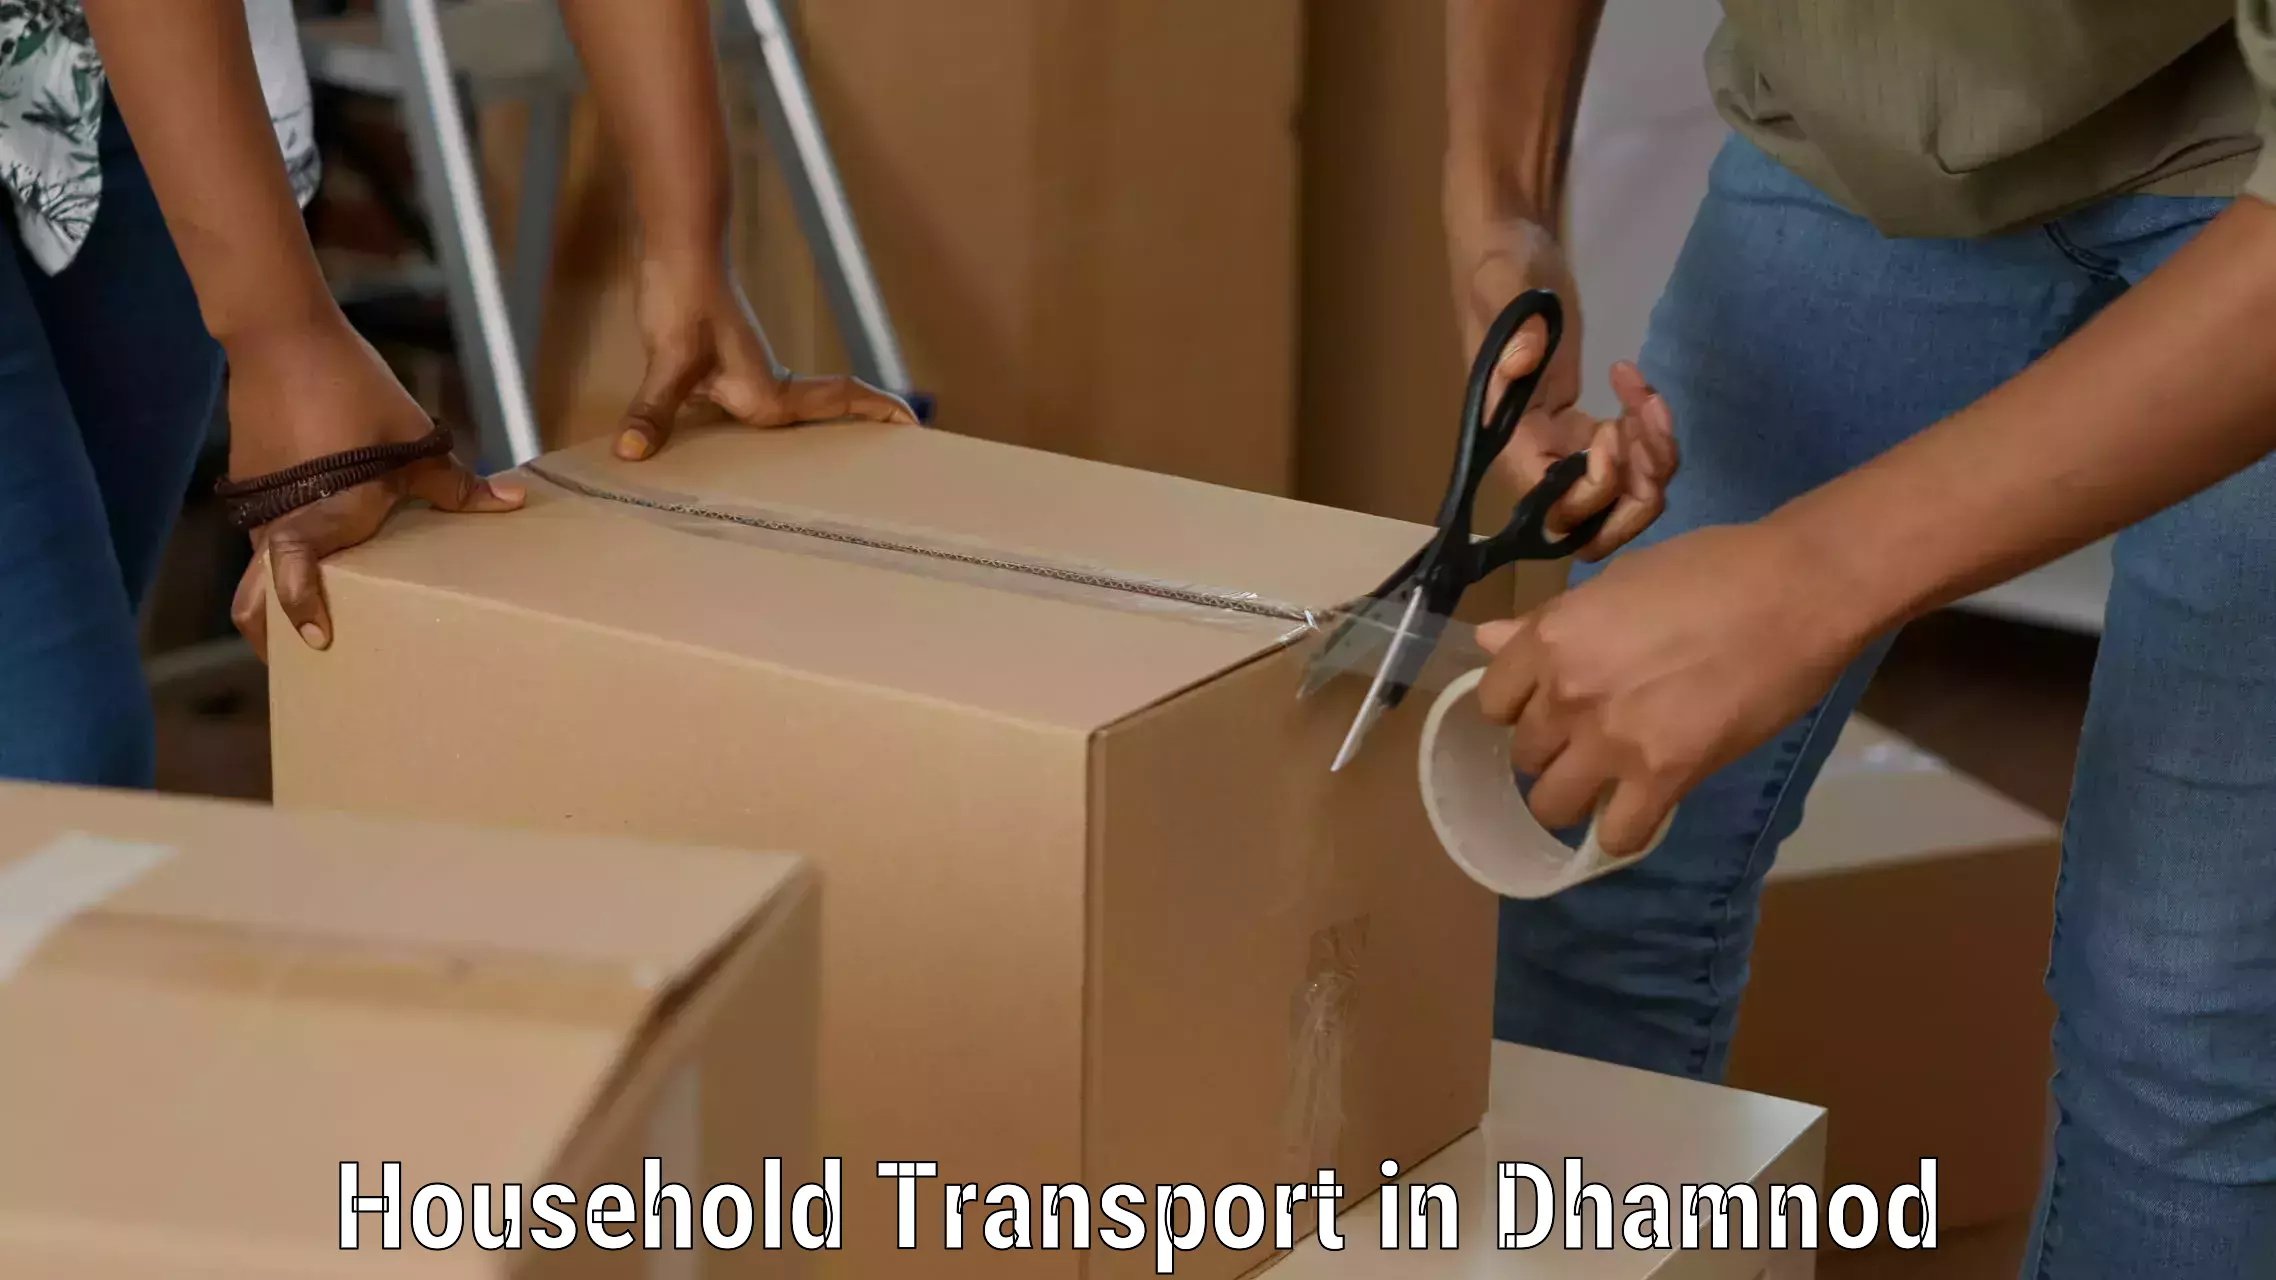 Household transport services in Dhamnod